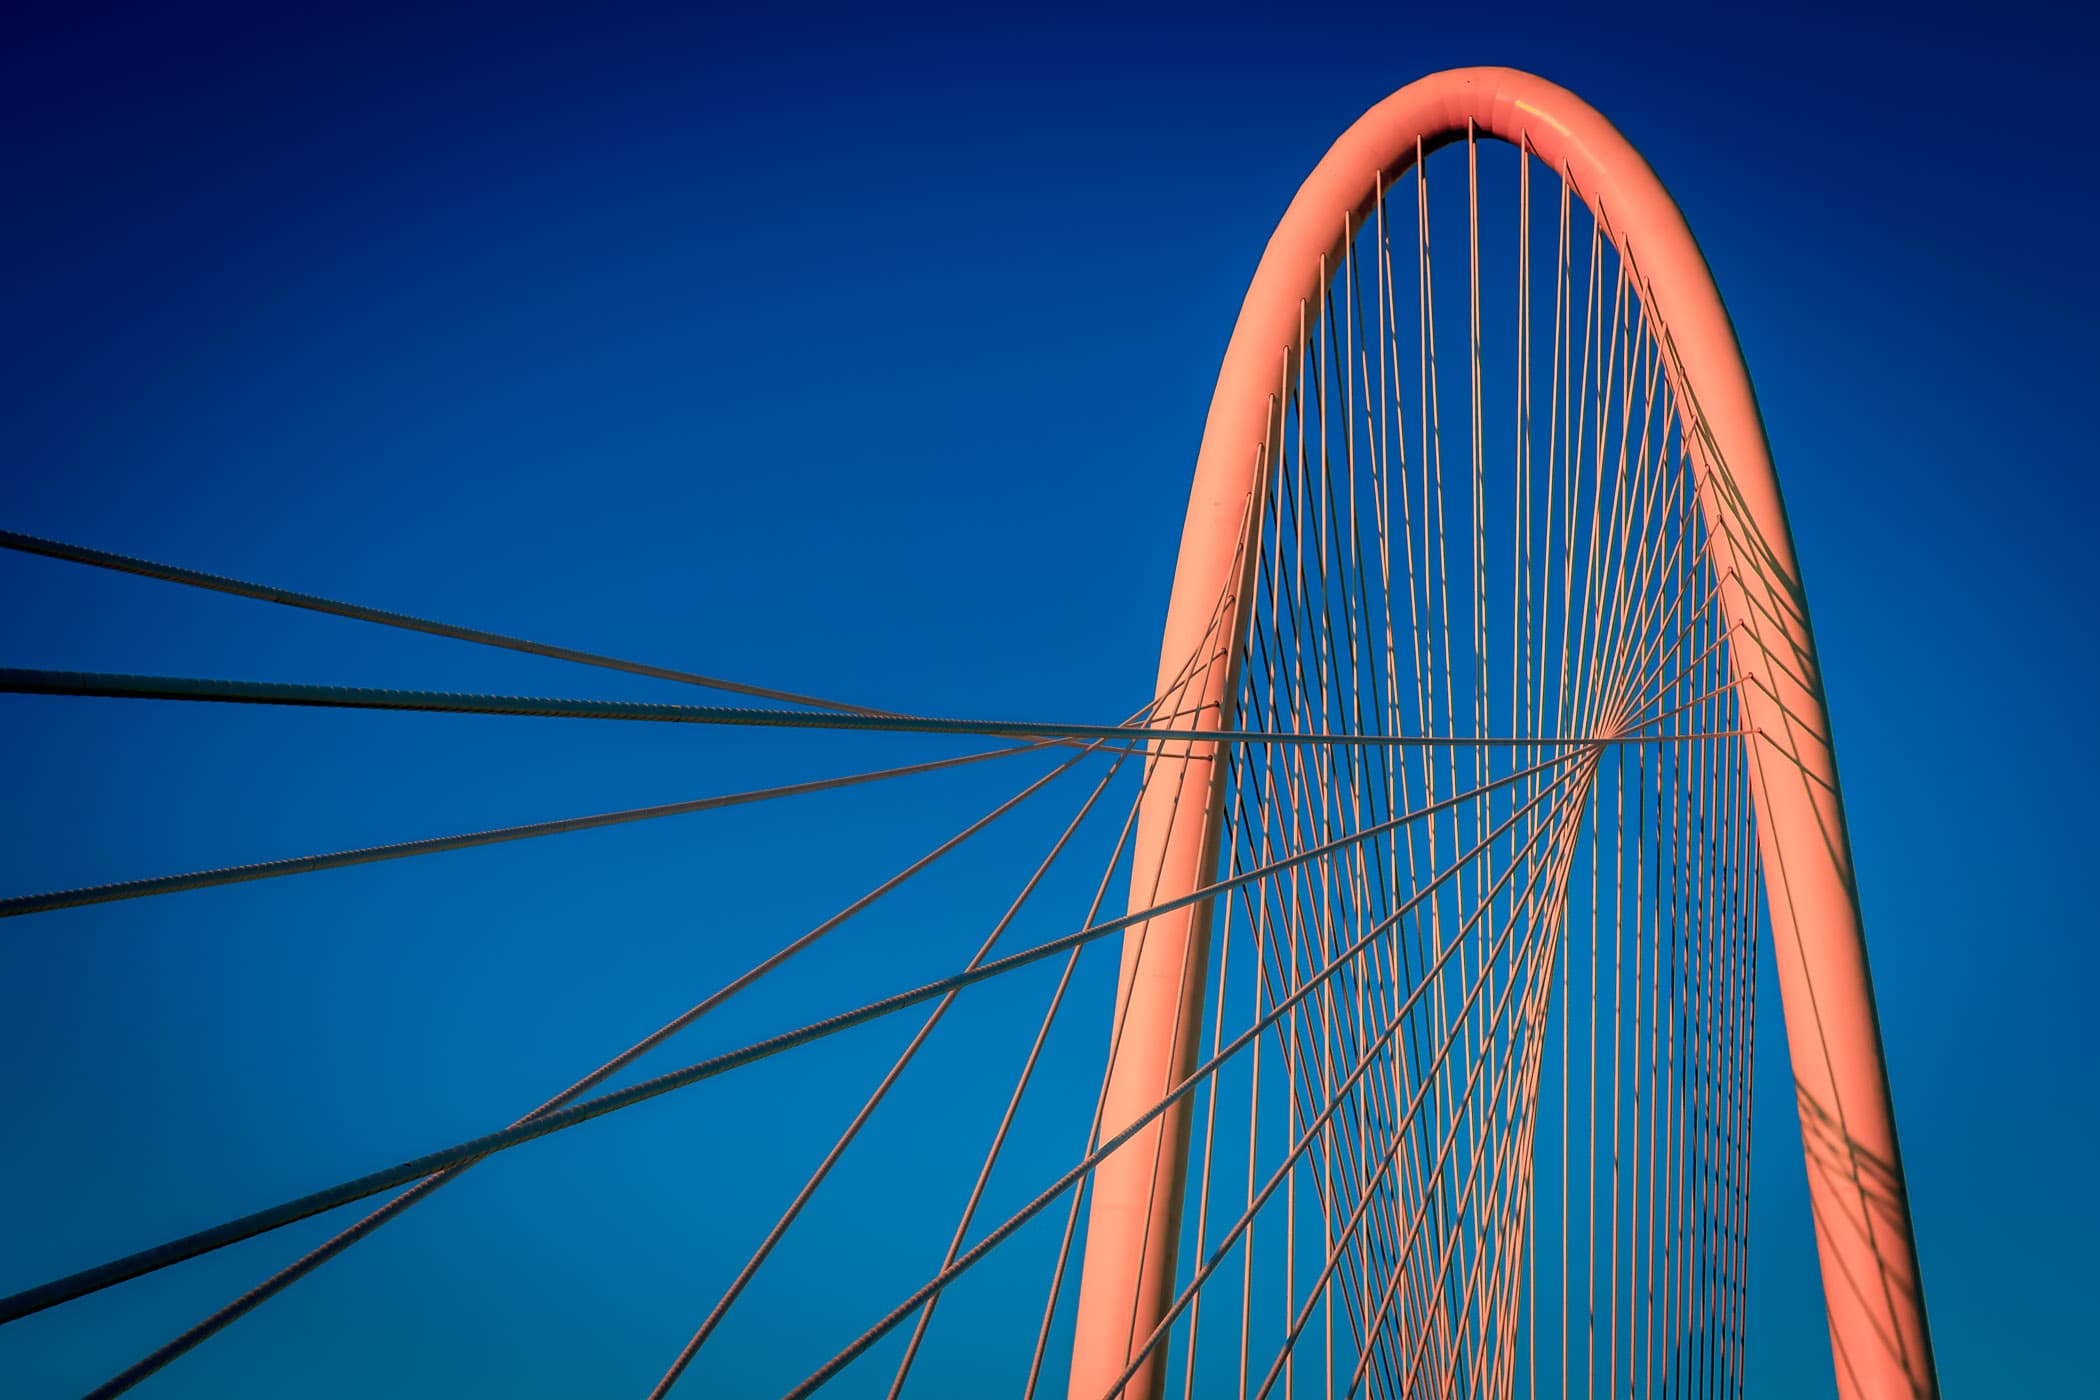 The first light of dawn casts an orange glow over Dallas' Margaret Hunt Hill Bridge, designed by Santiago Calatrava and dedicated in 2012.